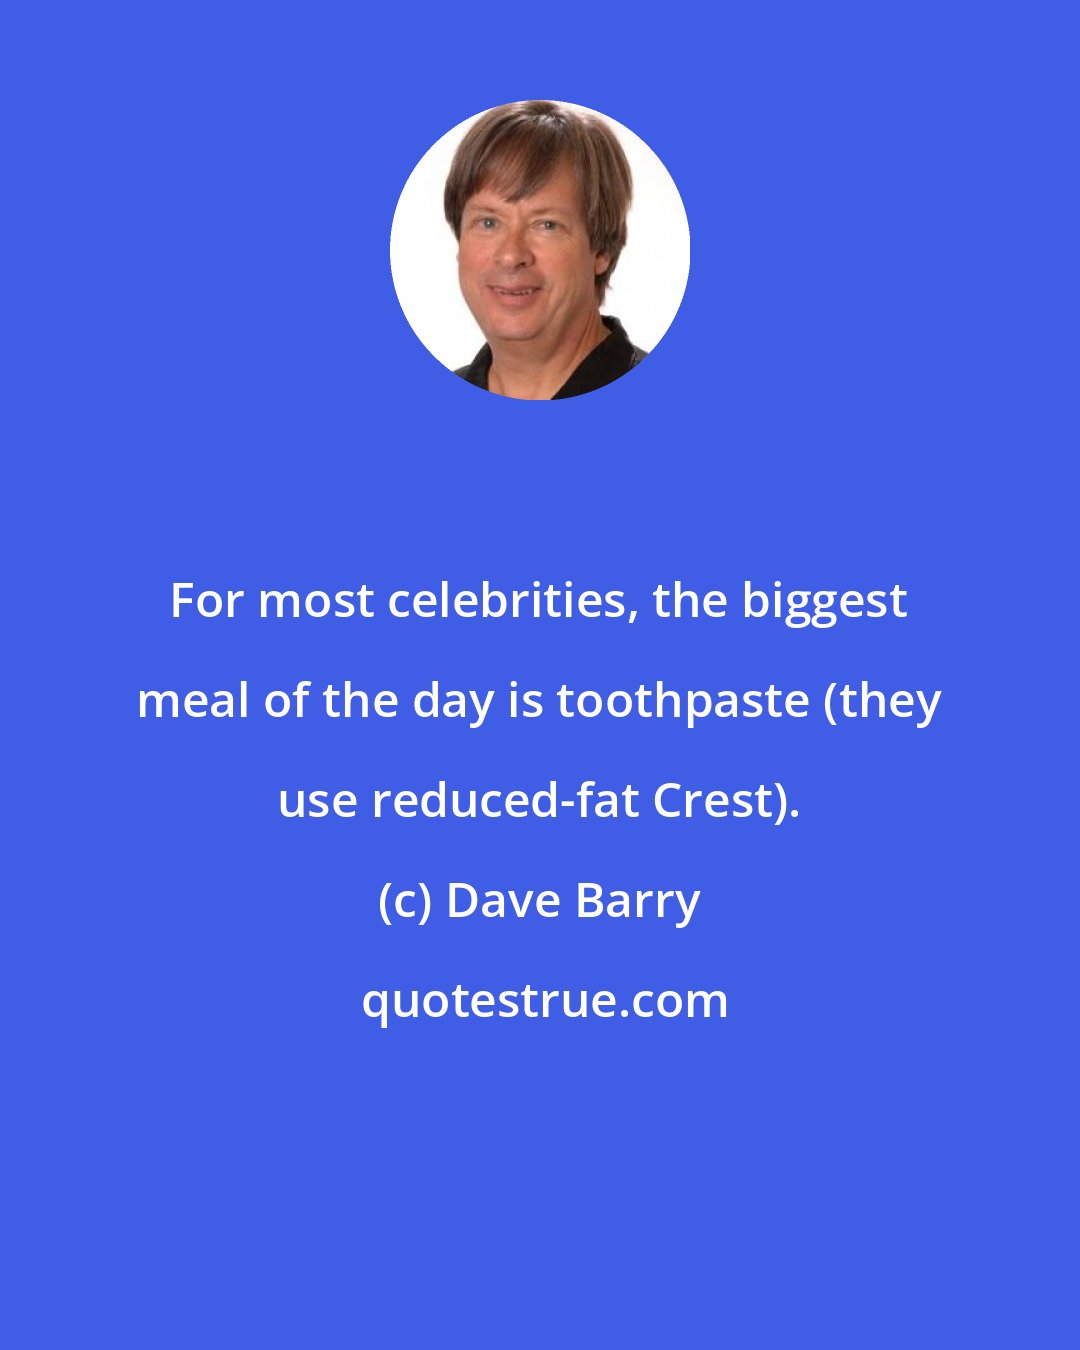 Dave Barry: For most celebrities, the biggest meal of the day is toothpaste (they use reduced-fat Crest).